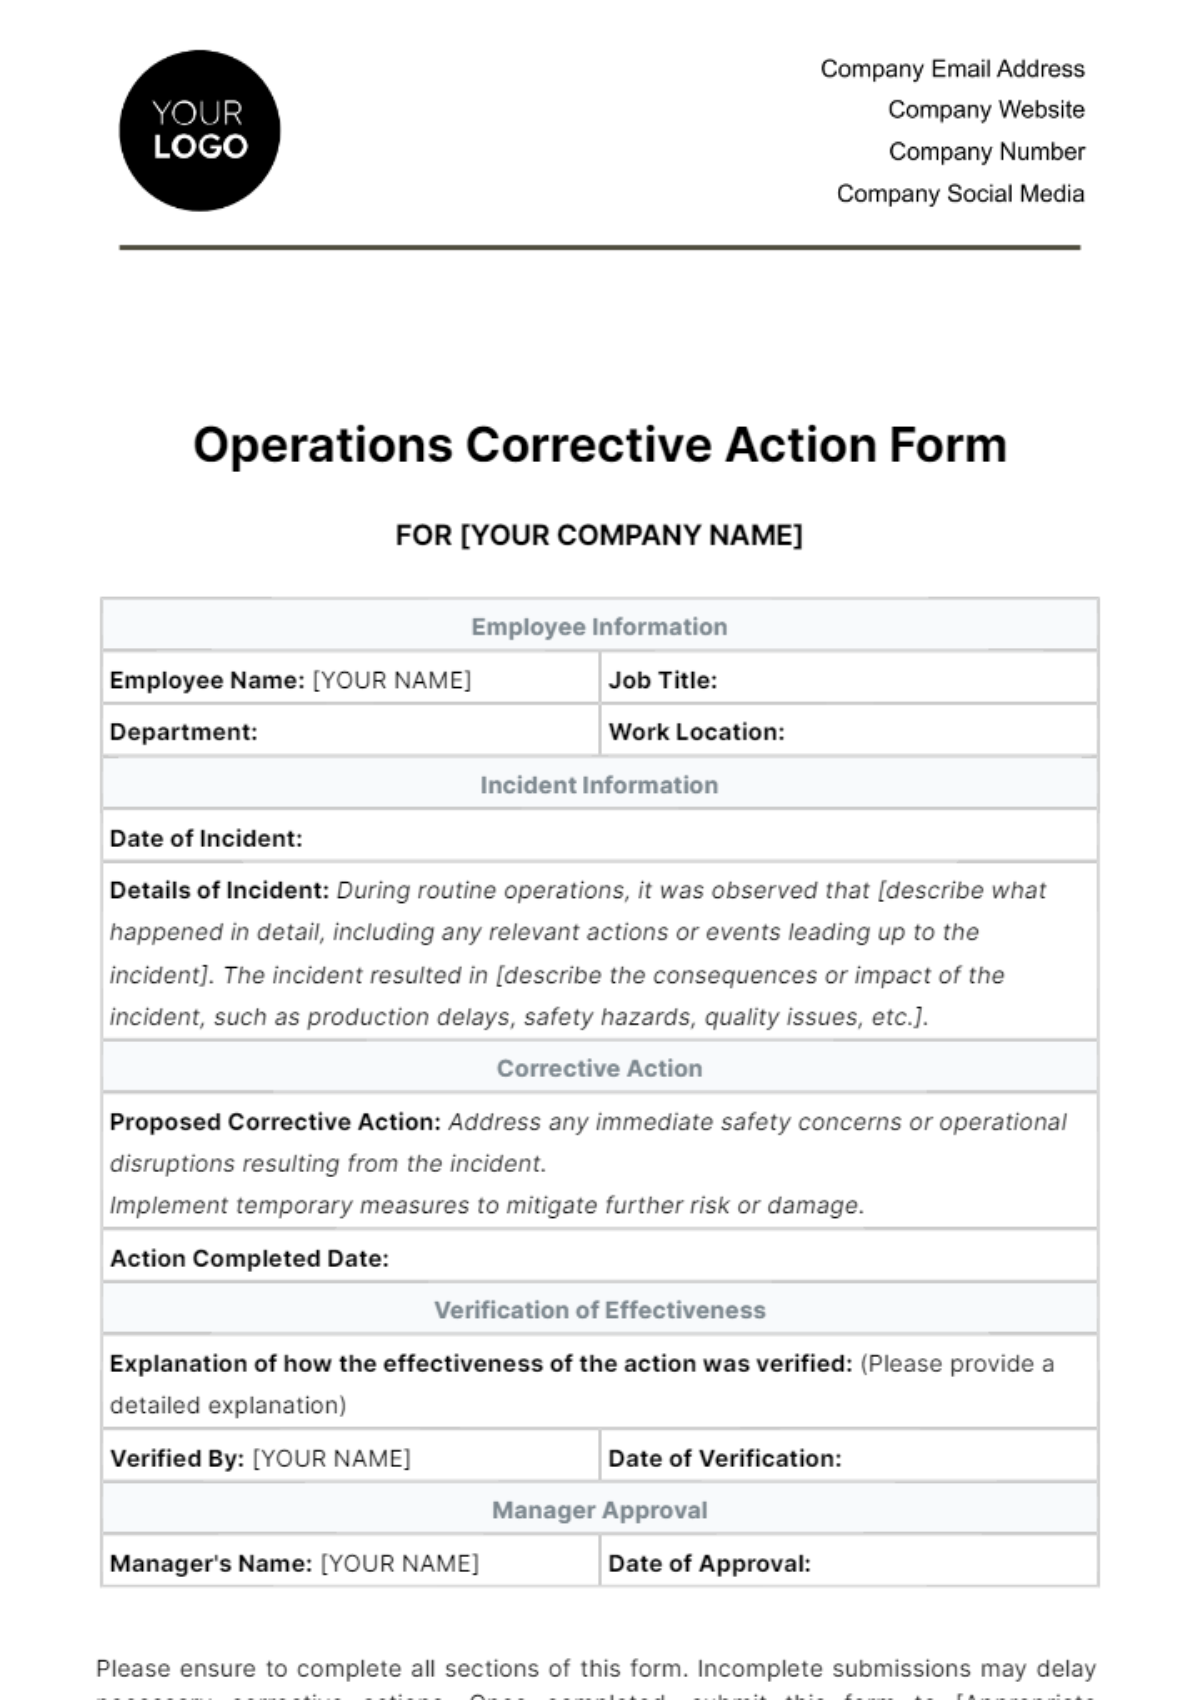 Free Operations Corrective Action Form Template